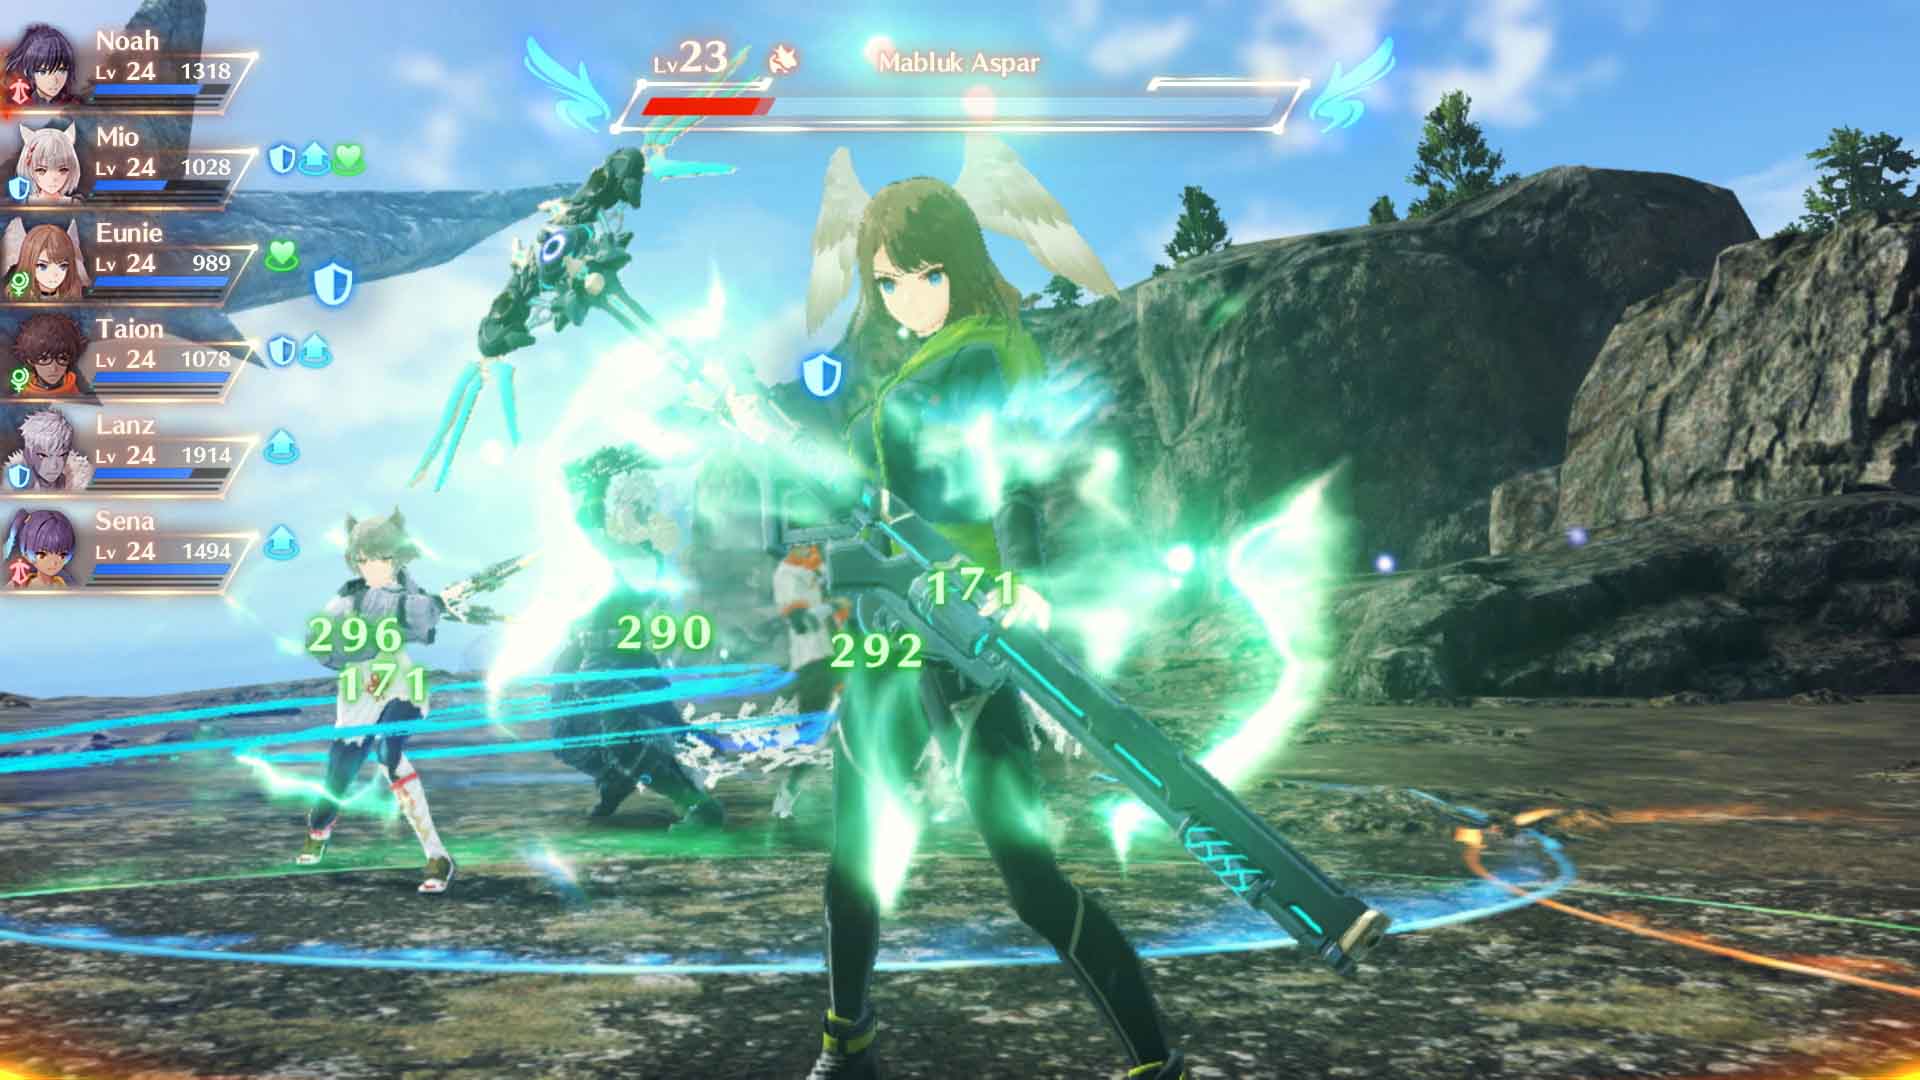 Xenoblade Chronicles 3 is complex, gargantuan, and brilliant | Hands-on preview